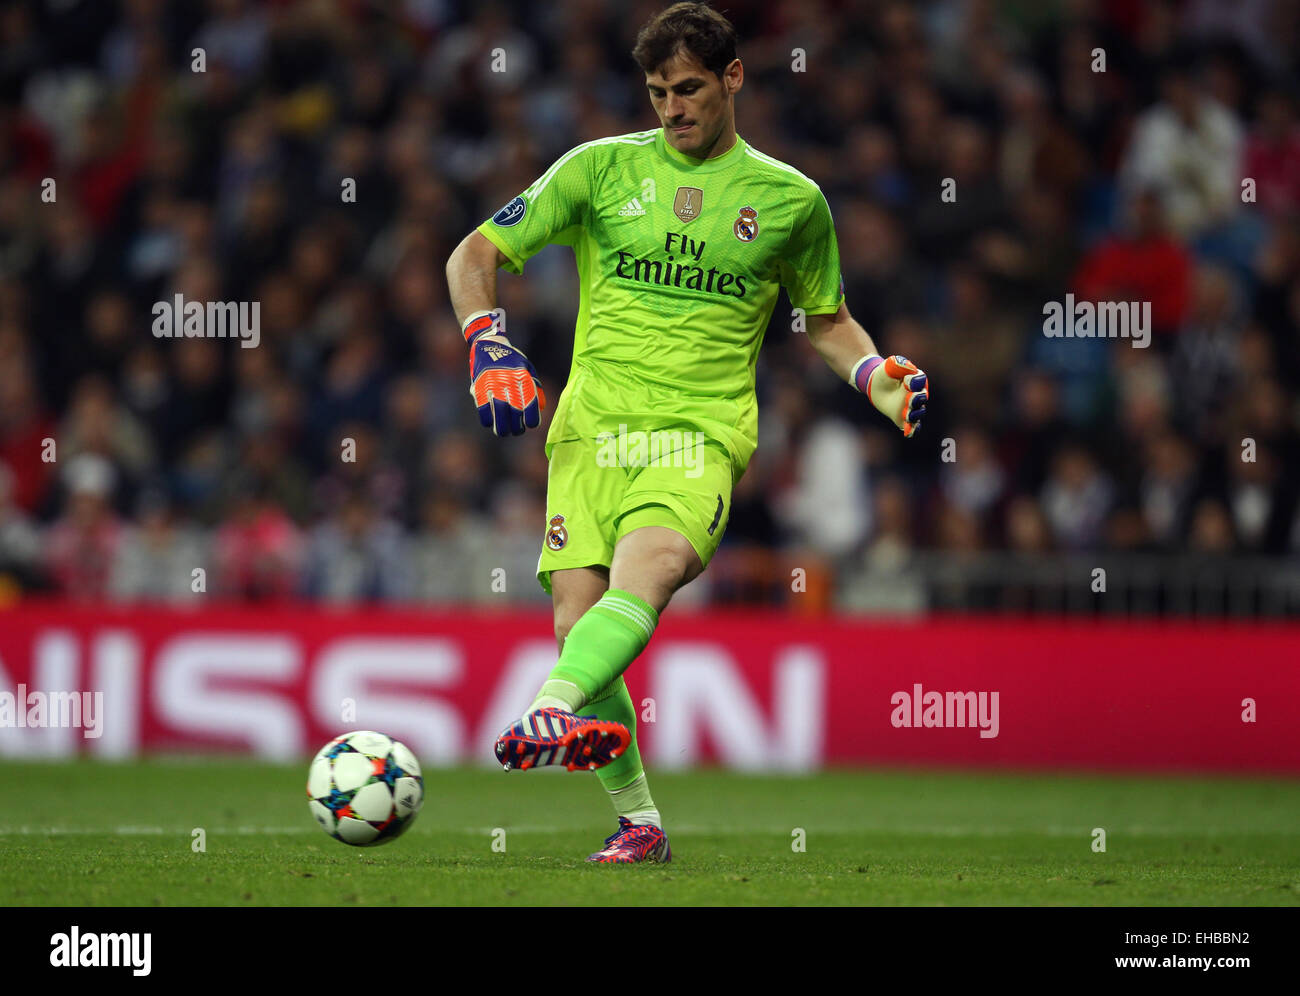 Madrid, Spain. 10th Mar, 2015. Real Madrid's goalkeeper Iker Casillas kicks a ball during the UEFA Champions League Round of 16 second leg soccer match at Santiago Bernabeu Stadium in Madrid, Spain, 10 March 2015. Photo: Ina Fassbender/dpa/Alamy Live News Stock Photo